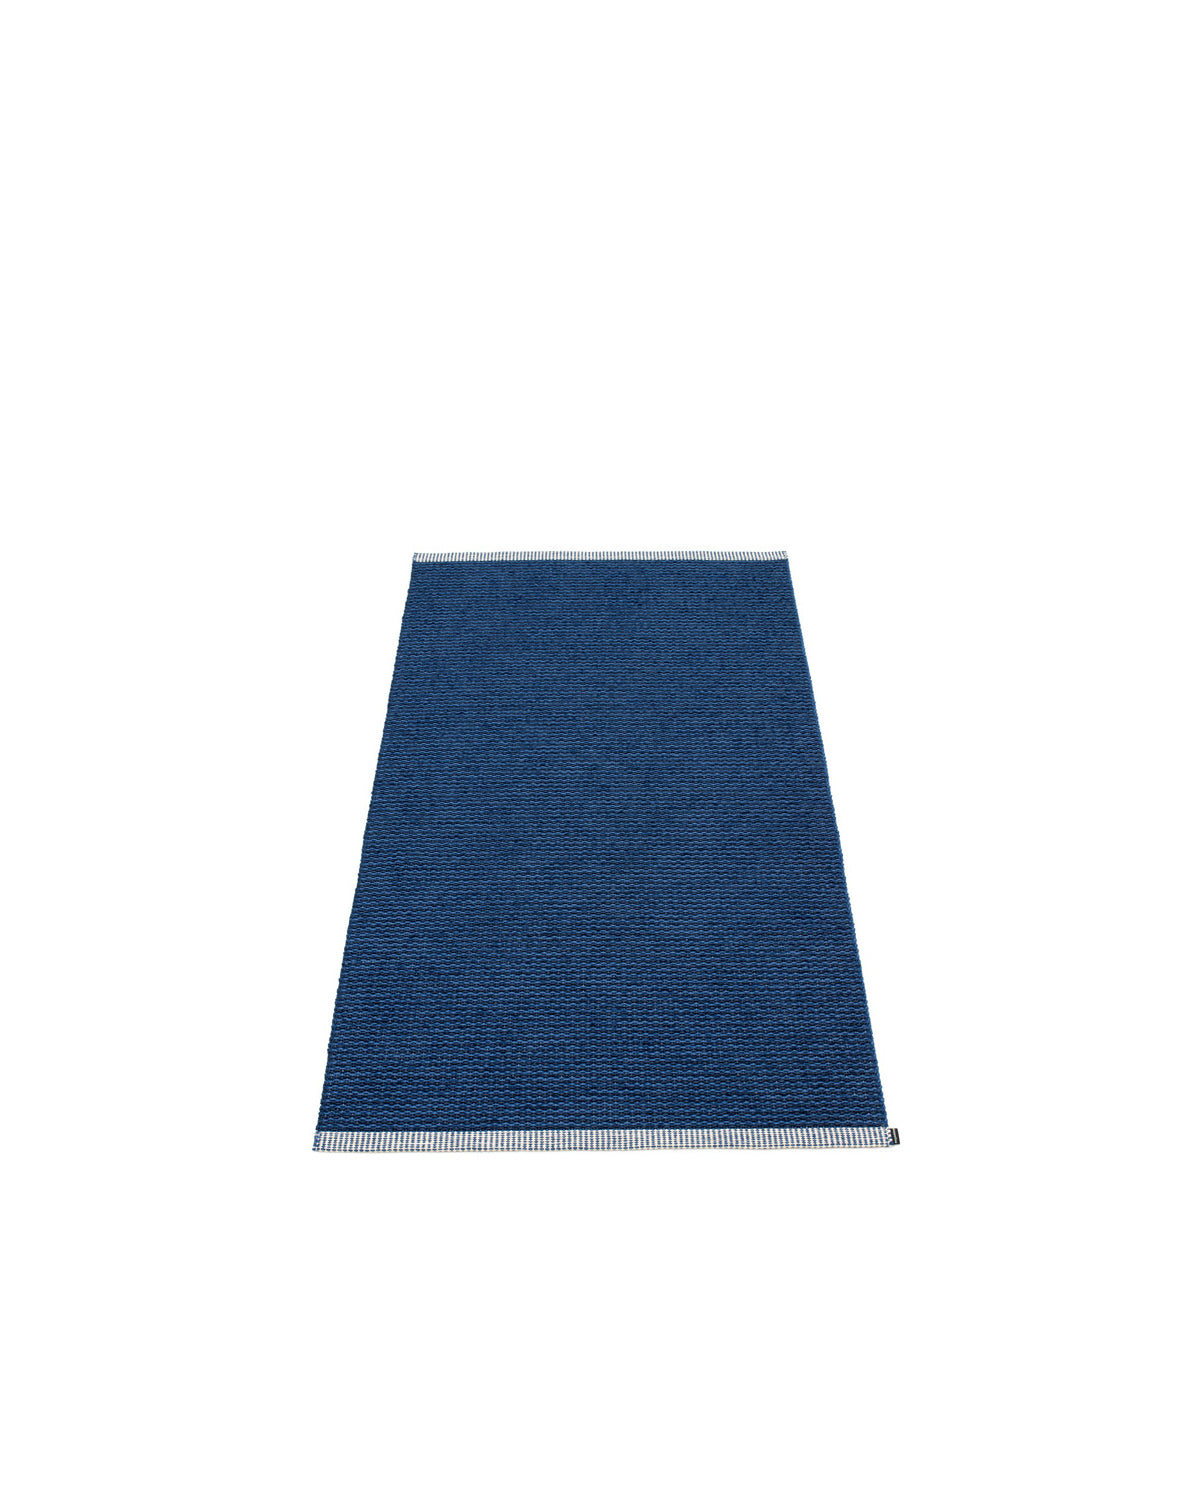 Pappelina Indoor & Outdoor Woven Rugs, 2 Colors, 3 Sizes, PVC Ribbon, Made  in Sweden on Food52